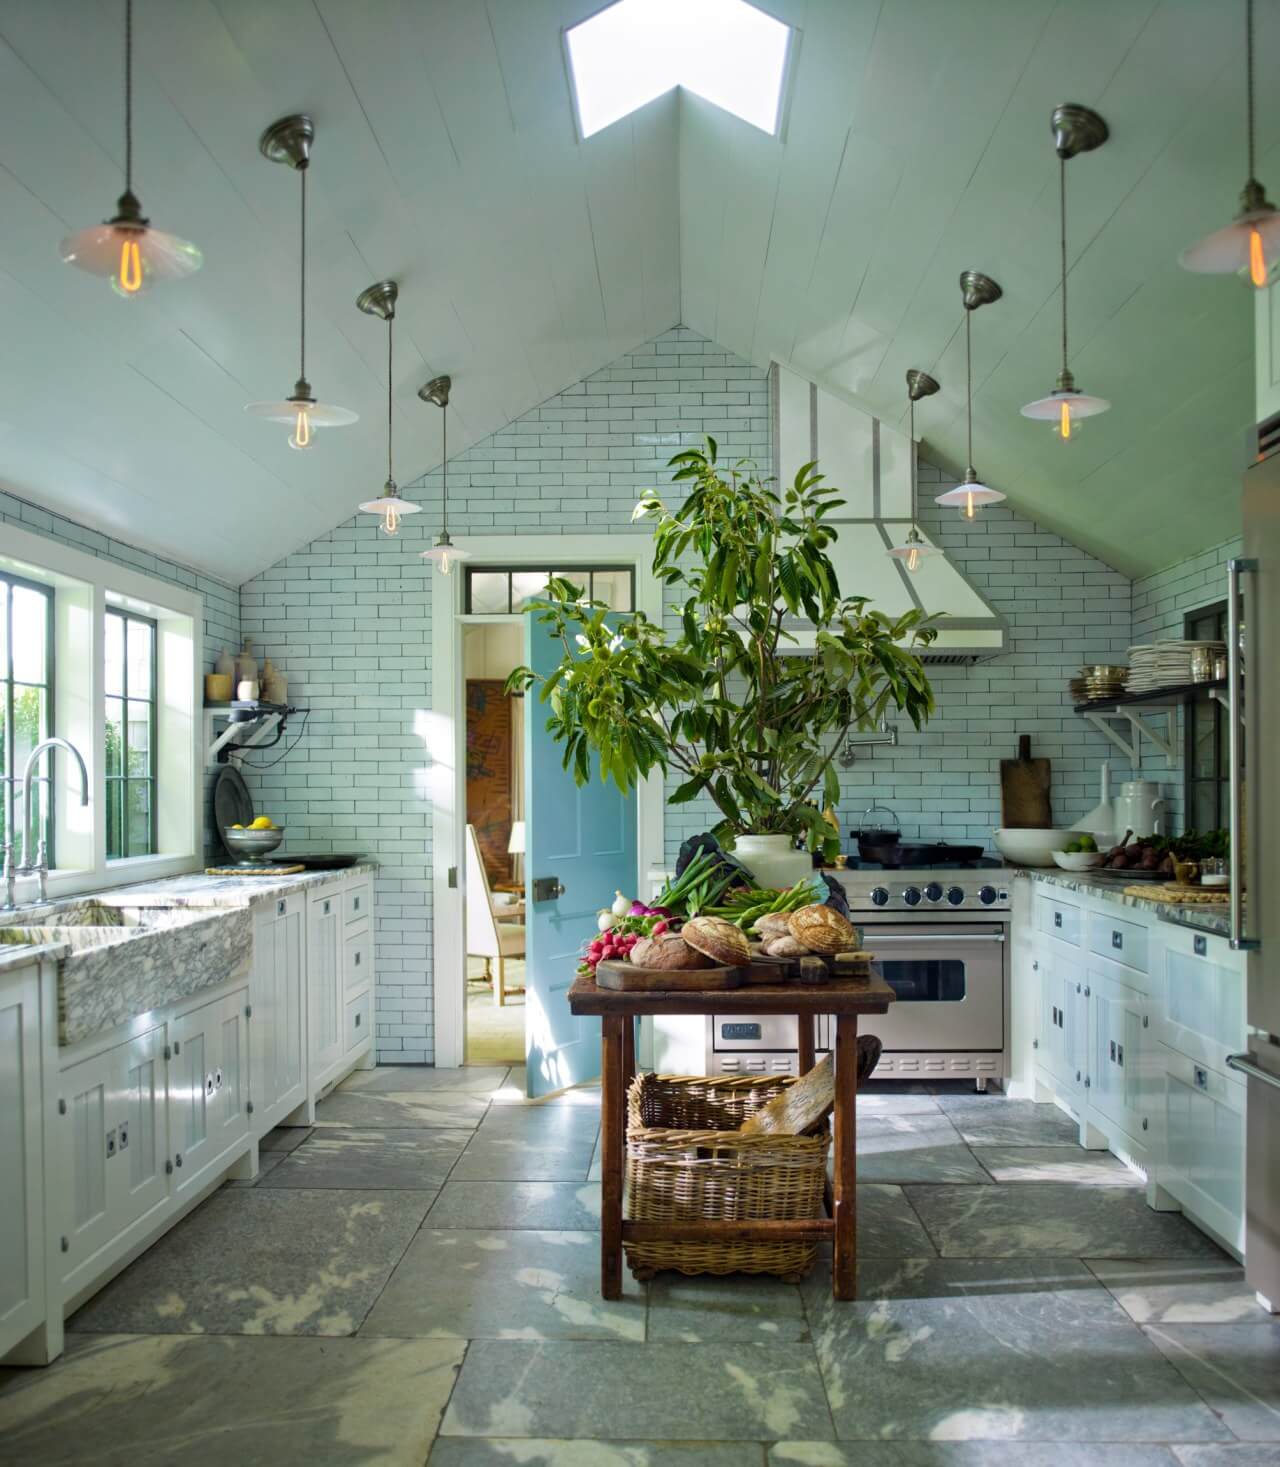 large-country-kitchen-stone-floor-small-skylight-island-nordroom